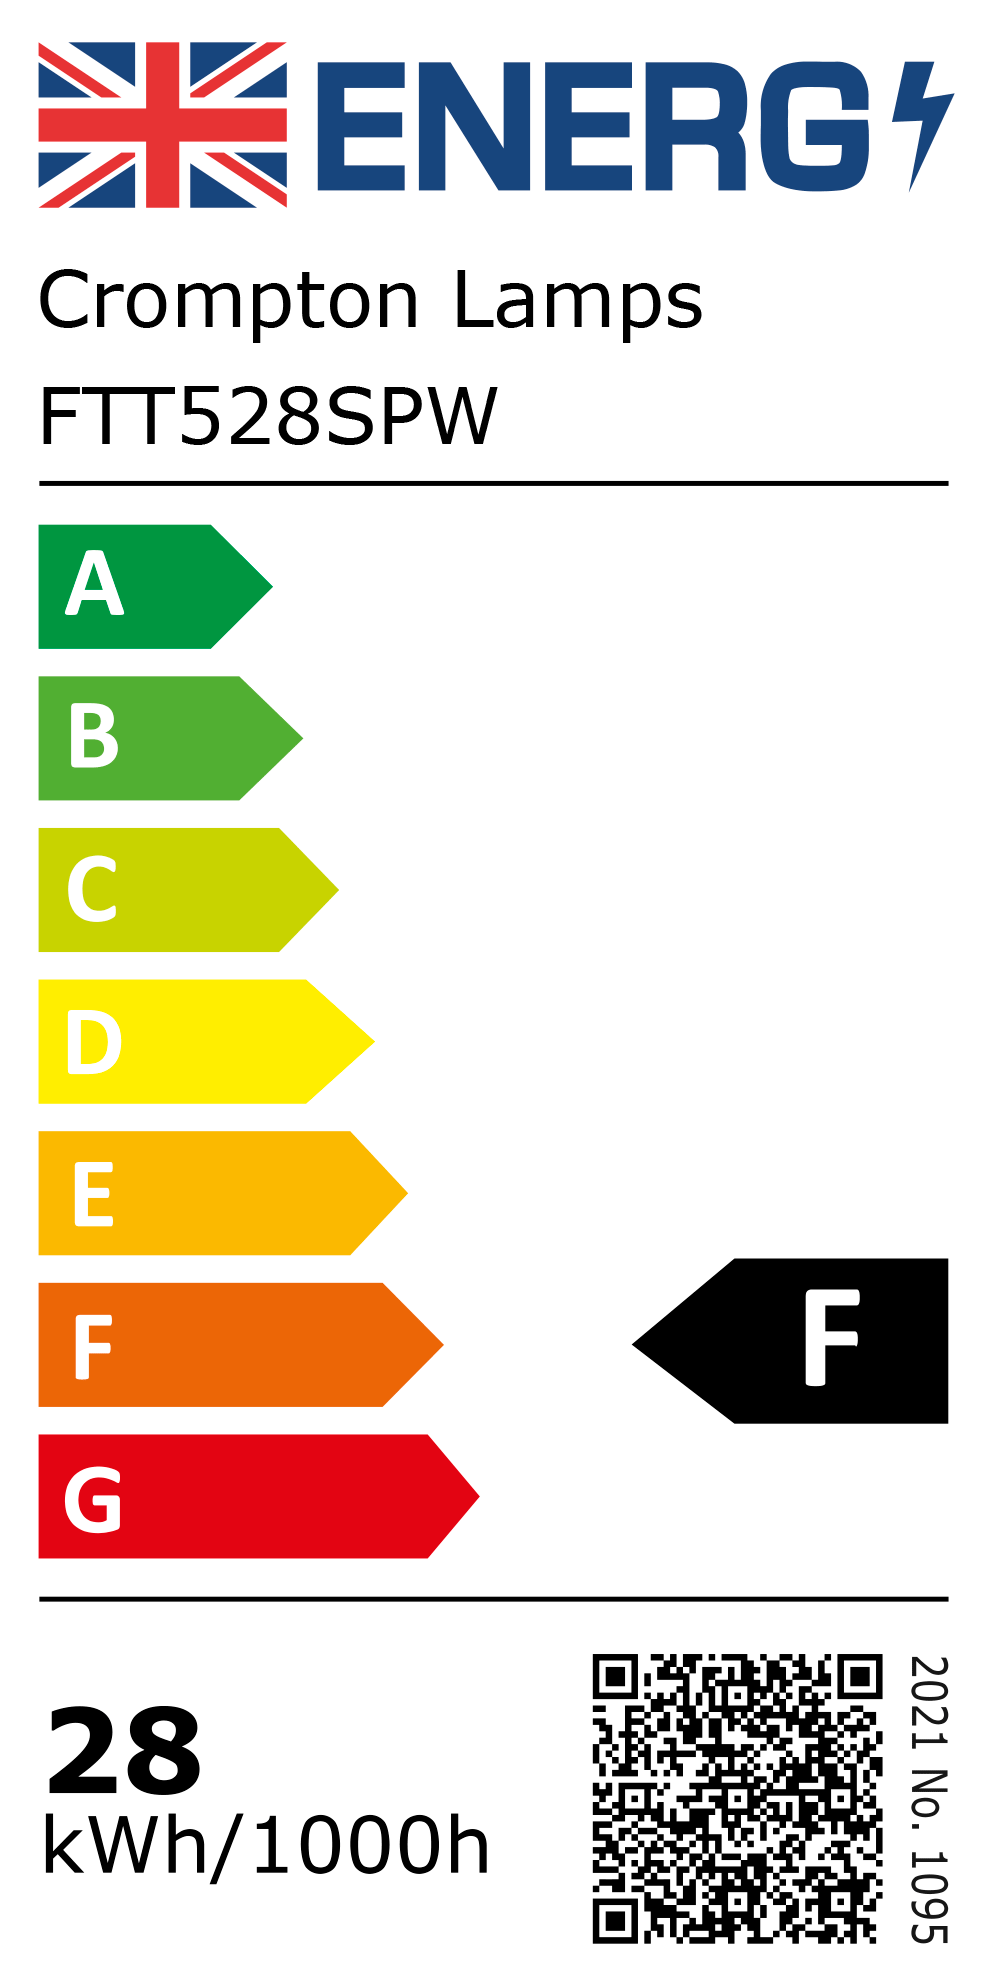 New 2021 Energy Rating Label: Stock Code FTT528SPW